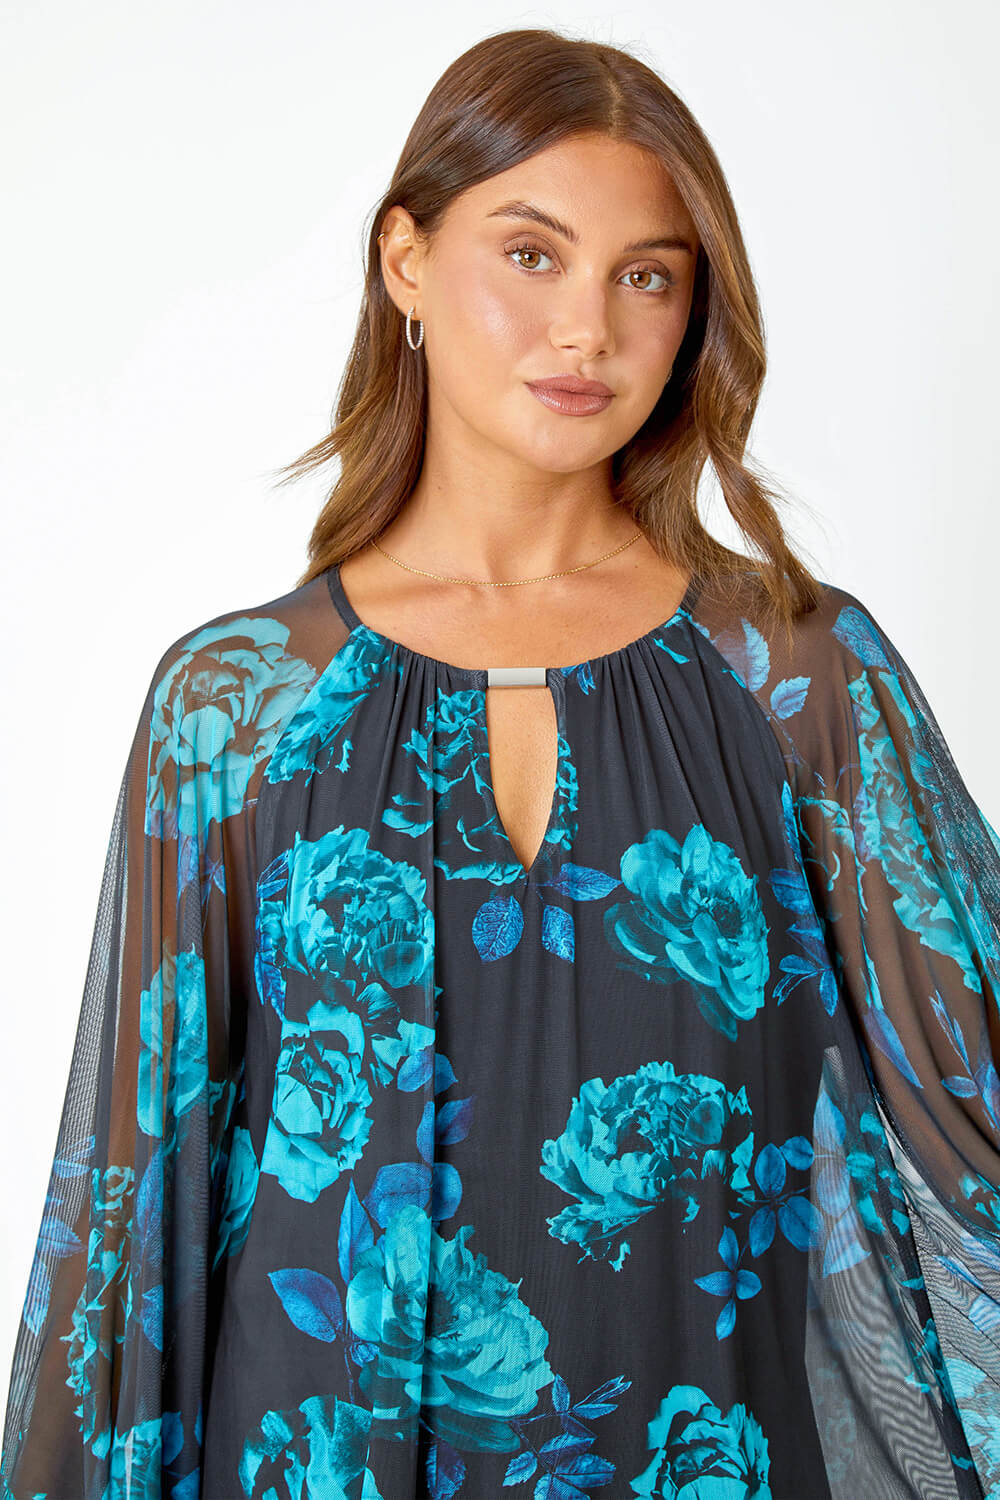 Blue Floral Print Mesh Stretch Top, Image 4 of 5